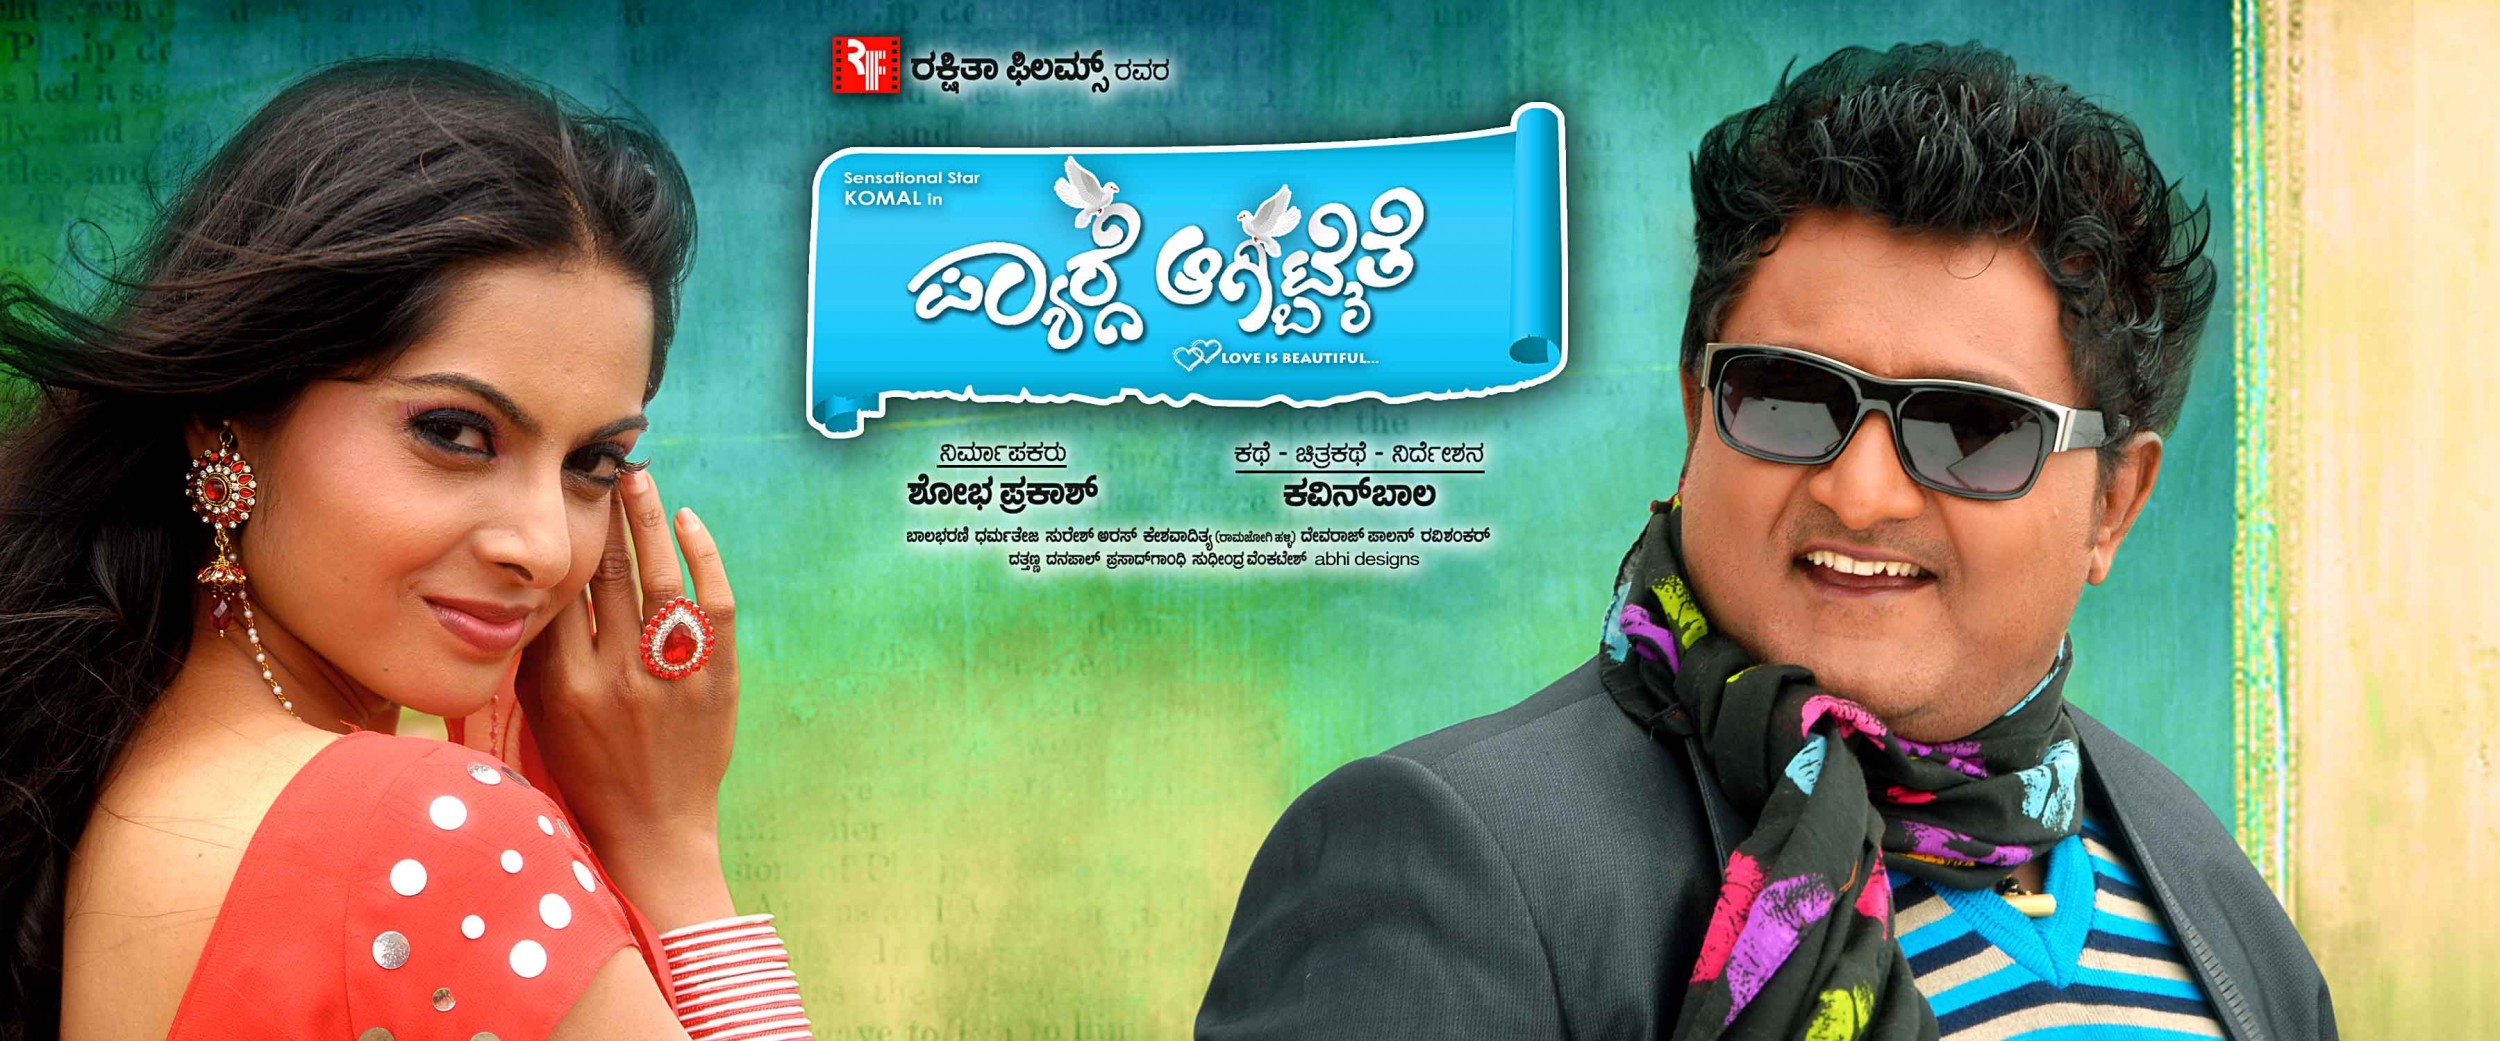 Mega Sized Movie Poster Image for Pyarge Aagbittaite (#5 of 14)